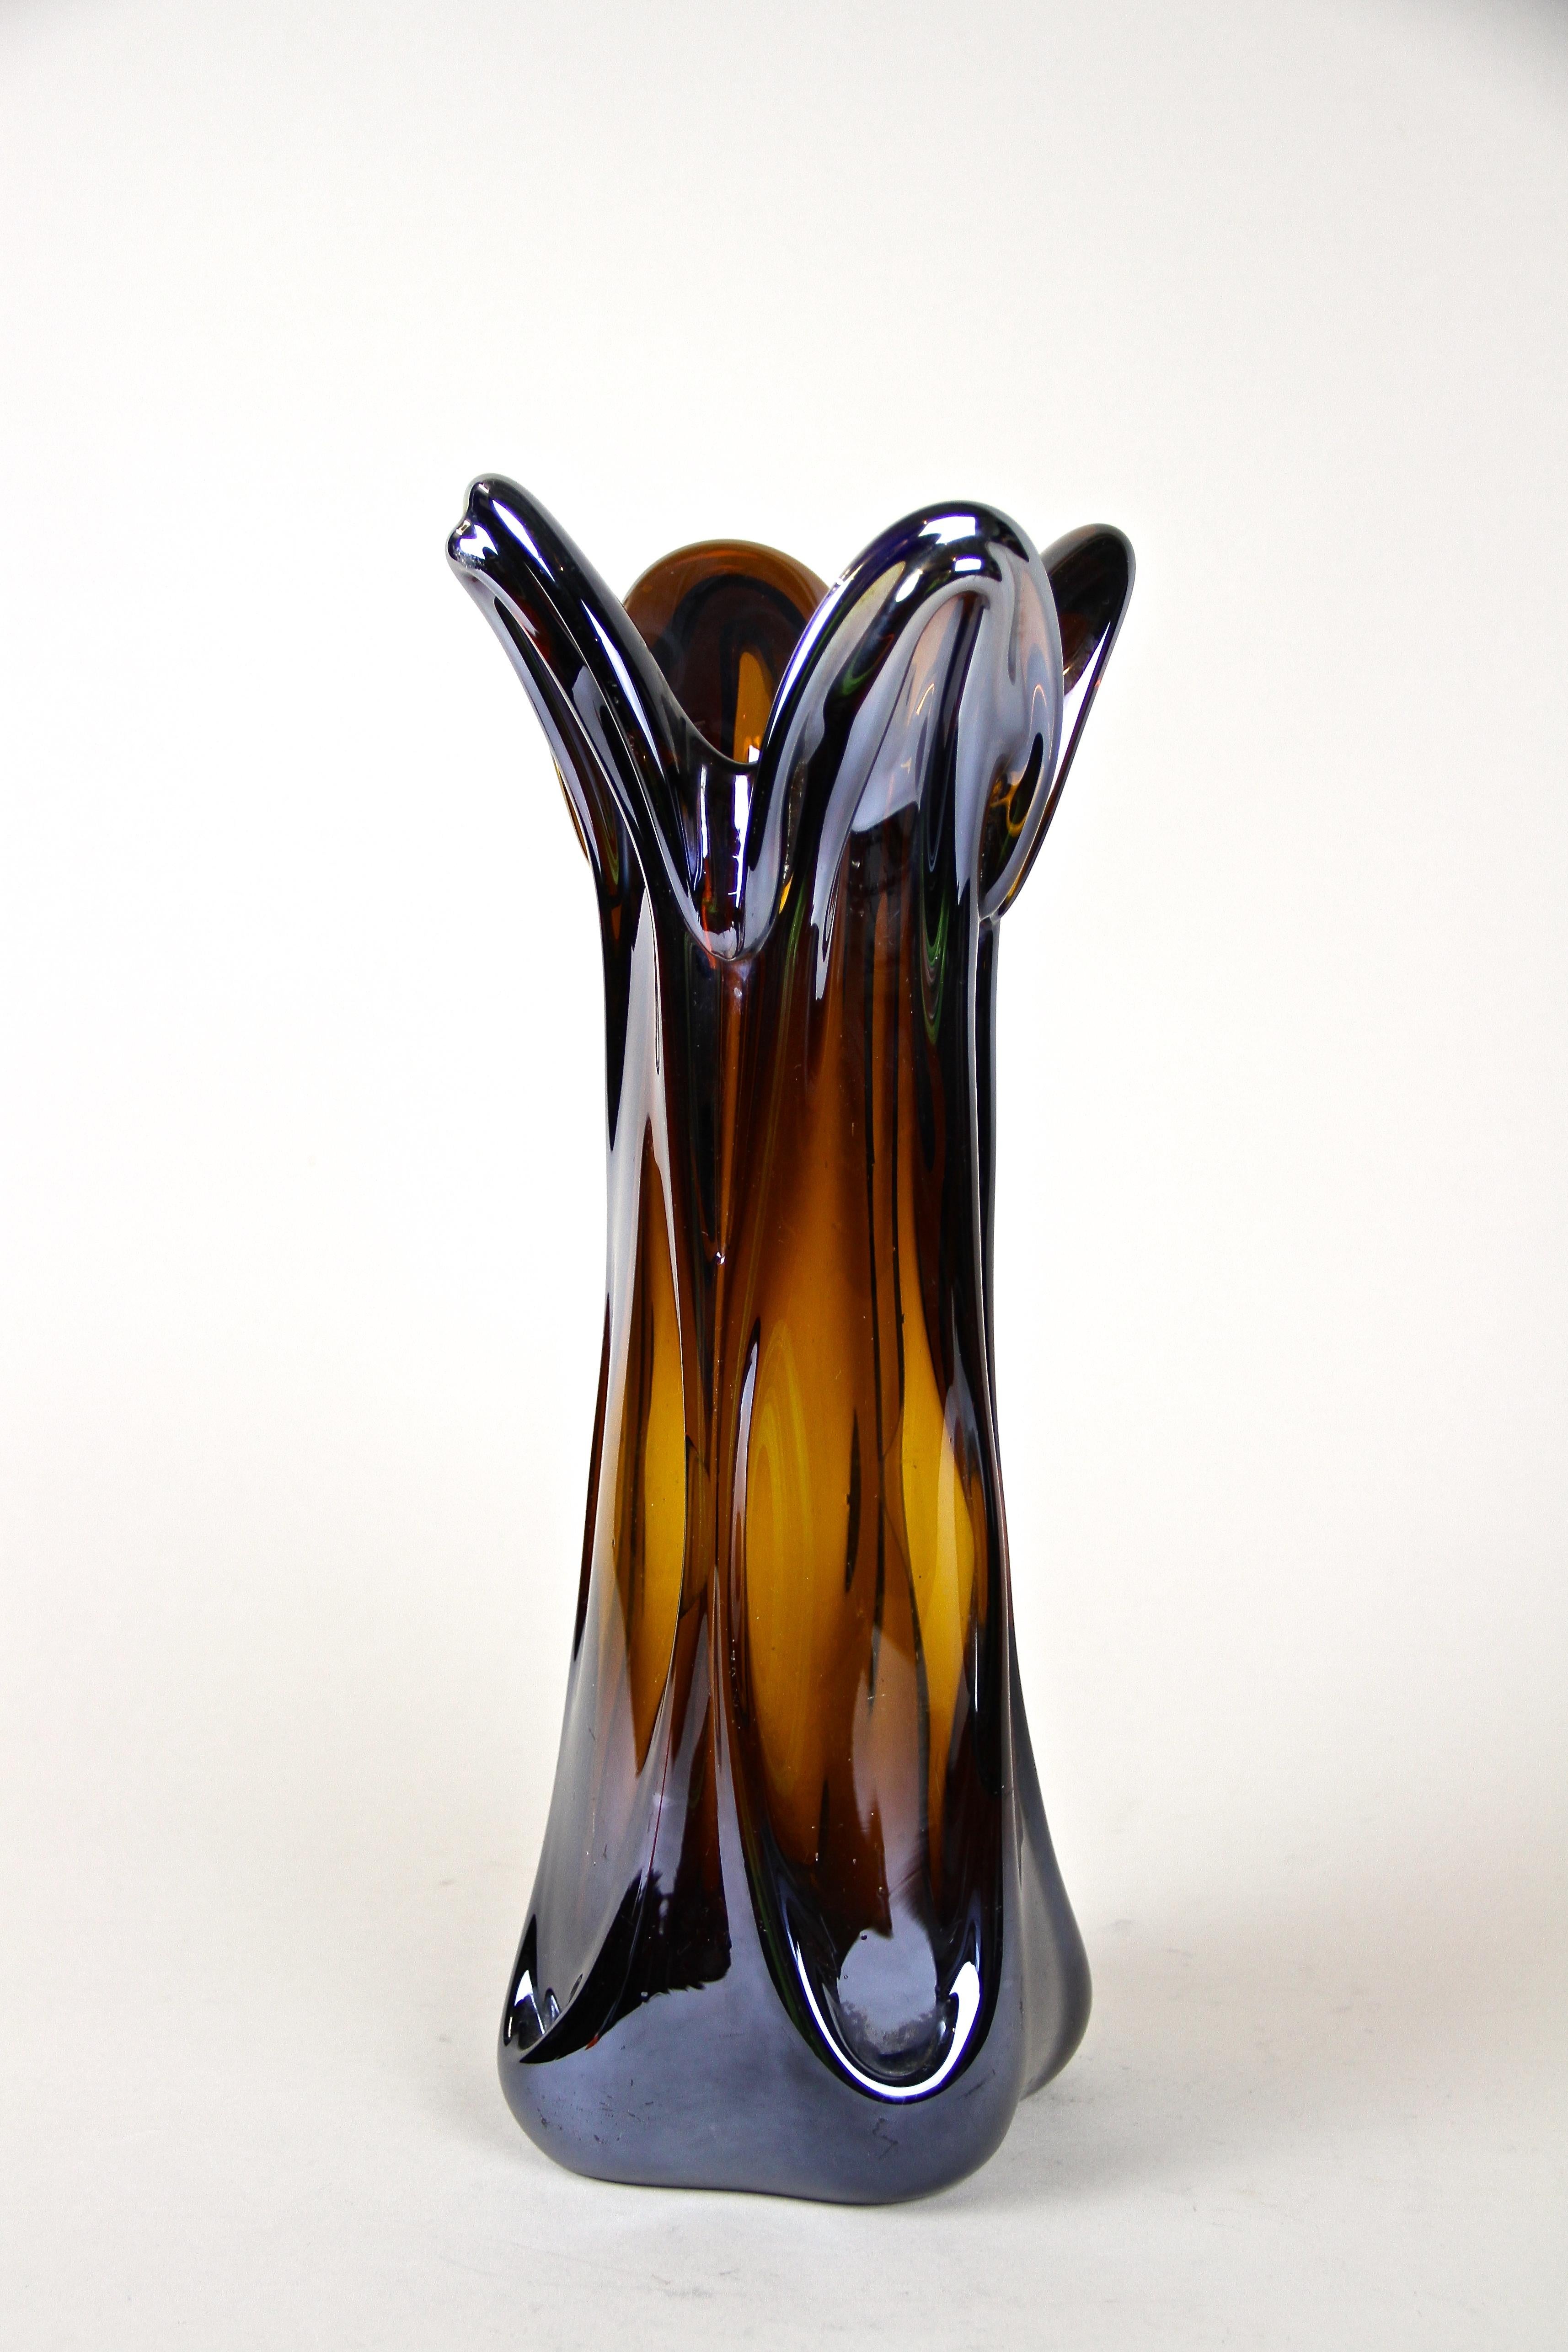 Extraordinary handcrafted Murano glass vase from the late 20th century around 1970 in Italy. This fantastic looking glass vase shows an unusual shaped, amber-colored body with exceptional chrome effect. The highly iridescent surface reflects the